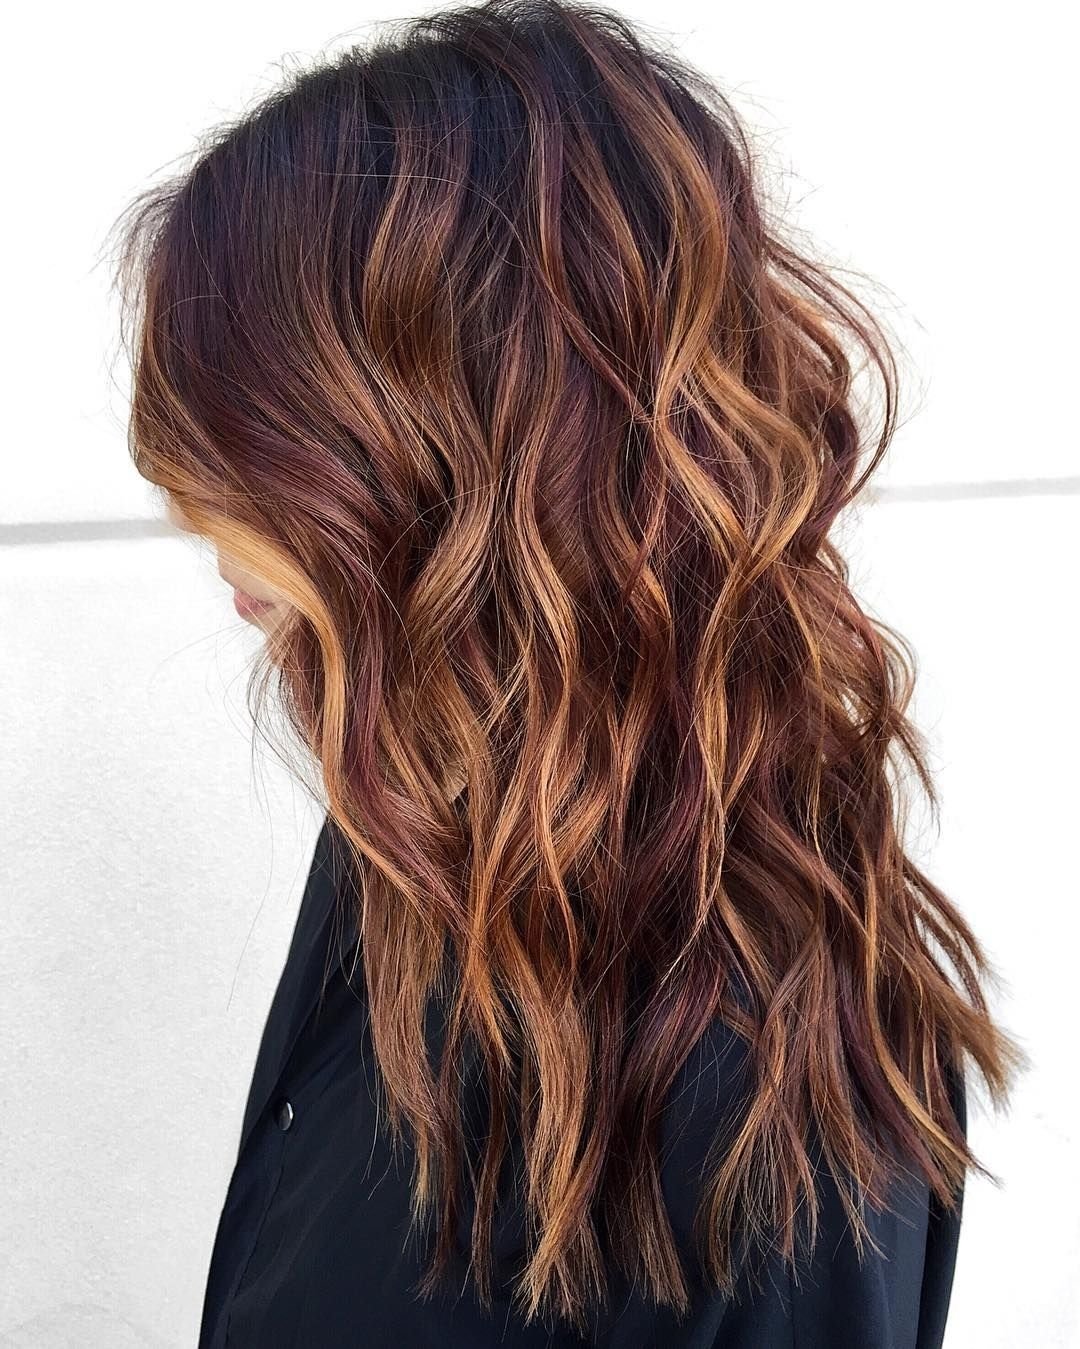 10 Most Recommended Hair Coloring Ideas For Brown Hair 2022